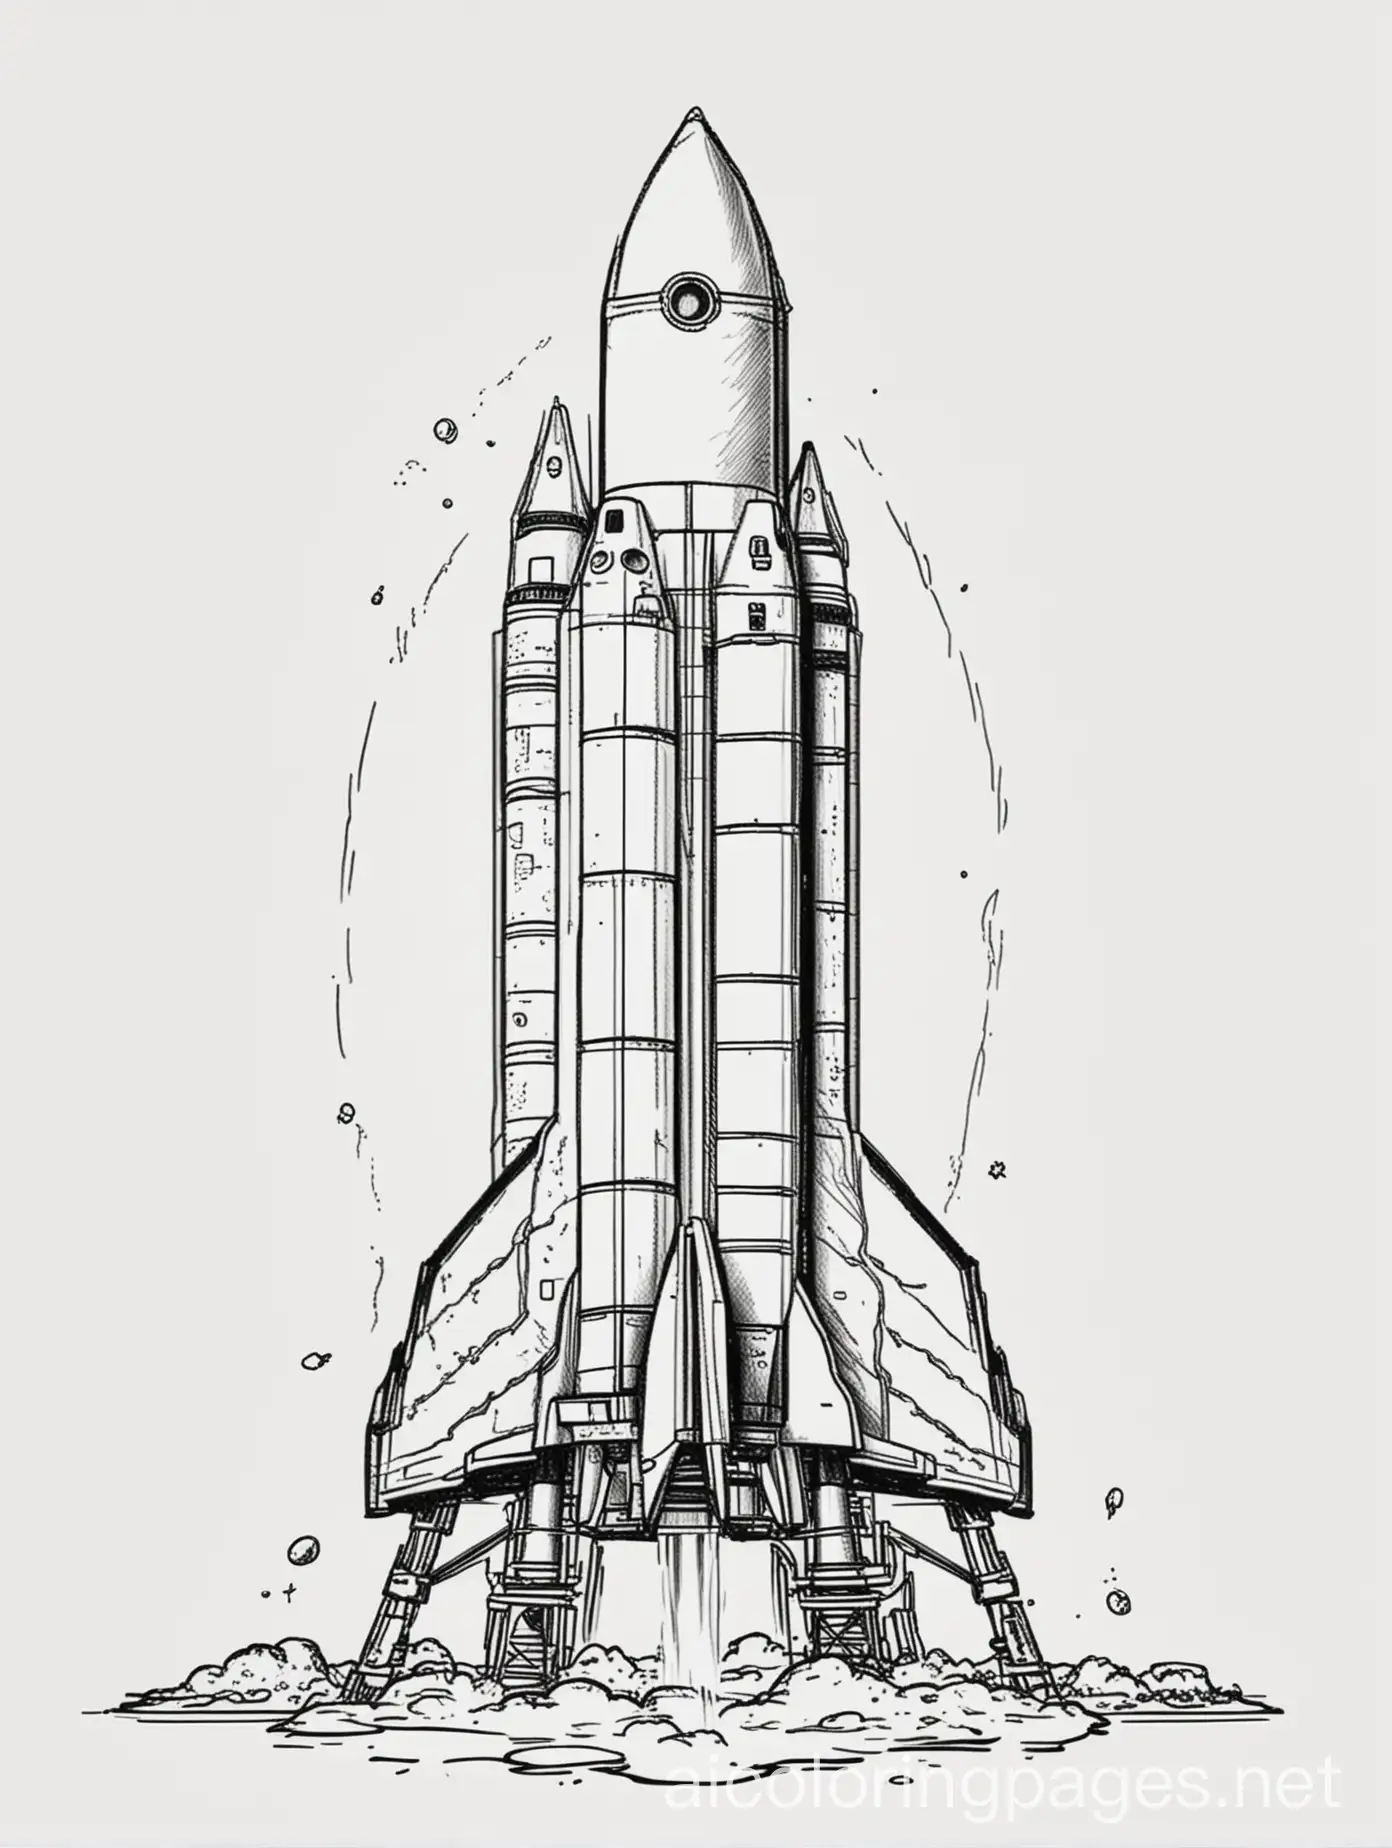 Rocket-Launch-Pad-Coloring-Page-Simple-Line-Art-for-Kids